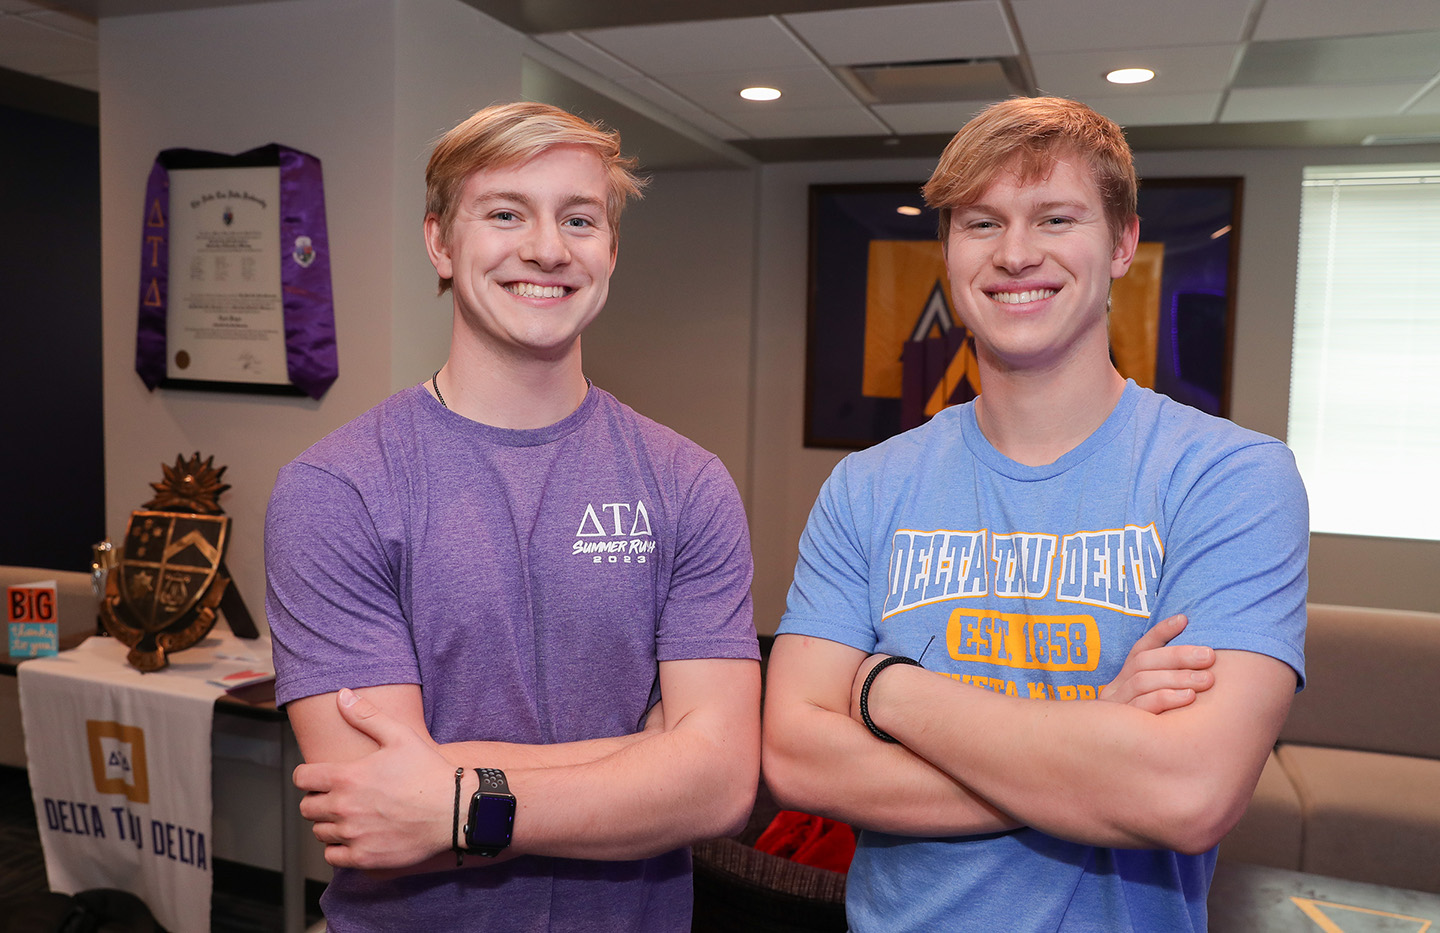 UNK freshmen Dylan, left, and Derek Pfeifer like to stay busy. They’re both members of the Honors Program, Kearney Health Opportunities Program, Health Science Club and Delta Tau Delta fraternity. (Photo by Erika Pritchard, UNK Communications)